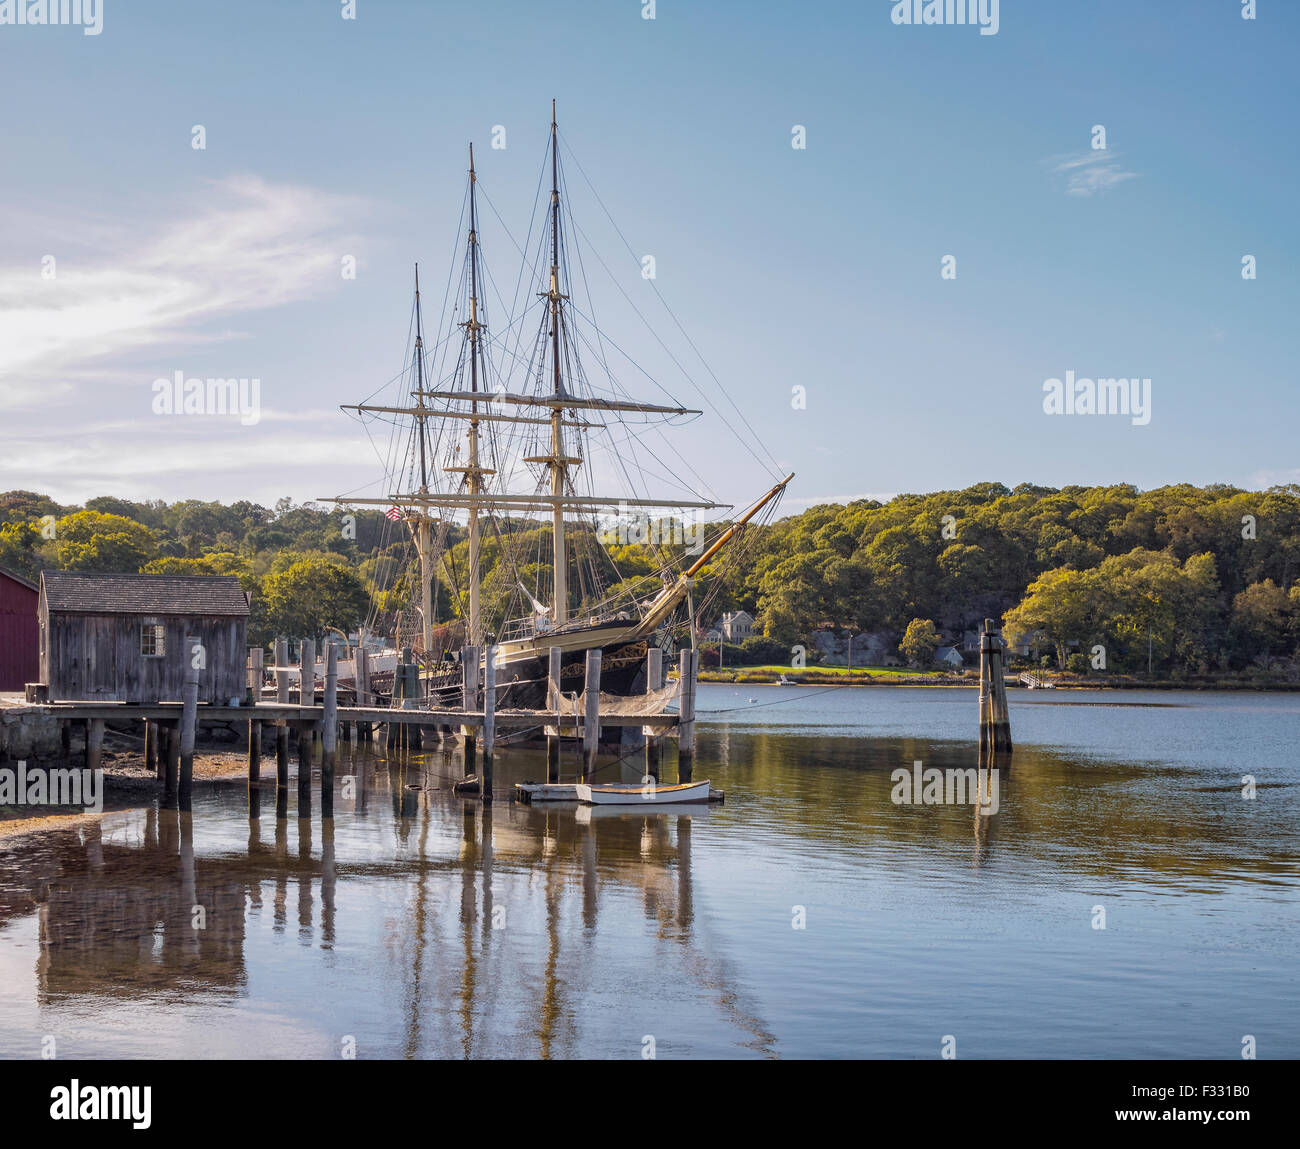 The Joseph Conrad, a wooden full-rigged tall ship, an exhibit and training ship at historic Mystic Seaport, Mystic Connecticut. Stock Photo